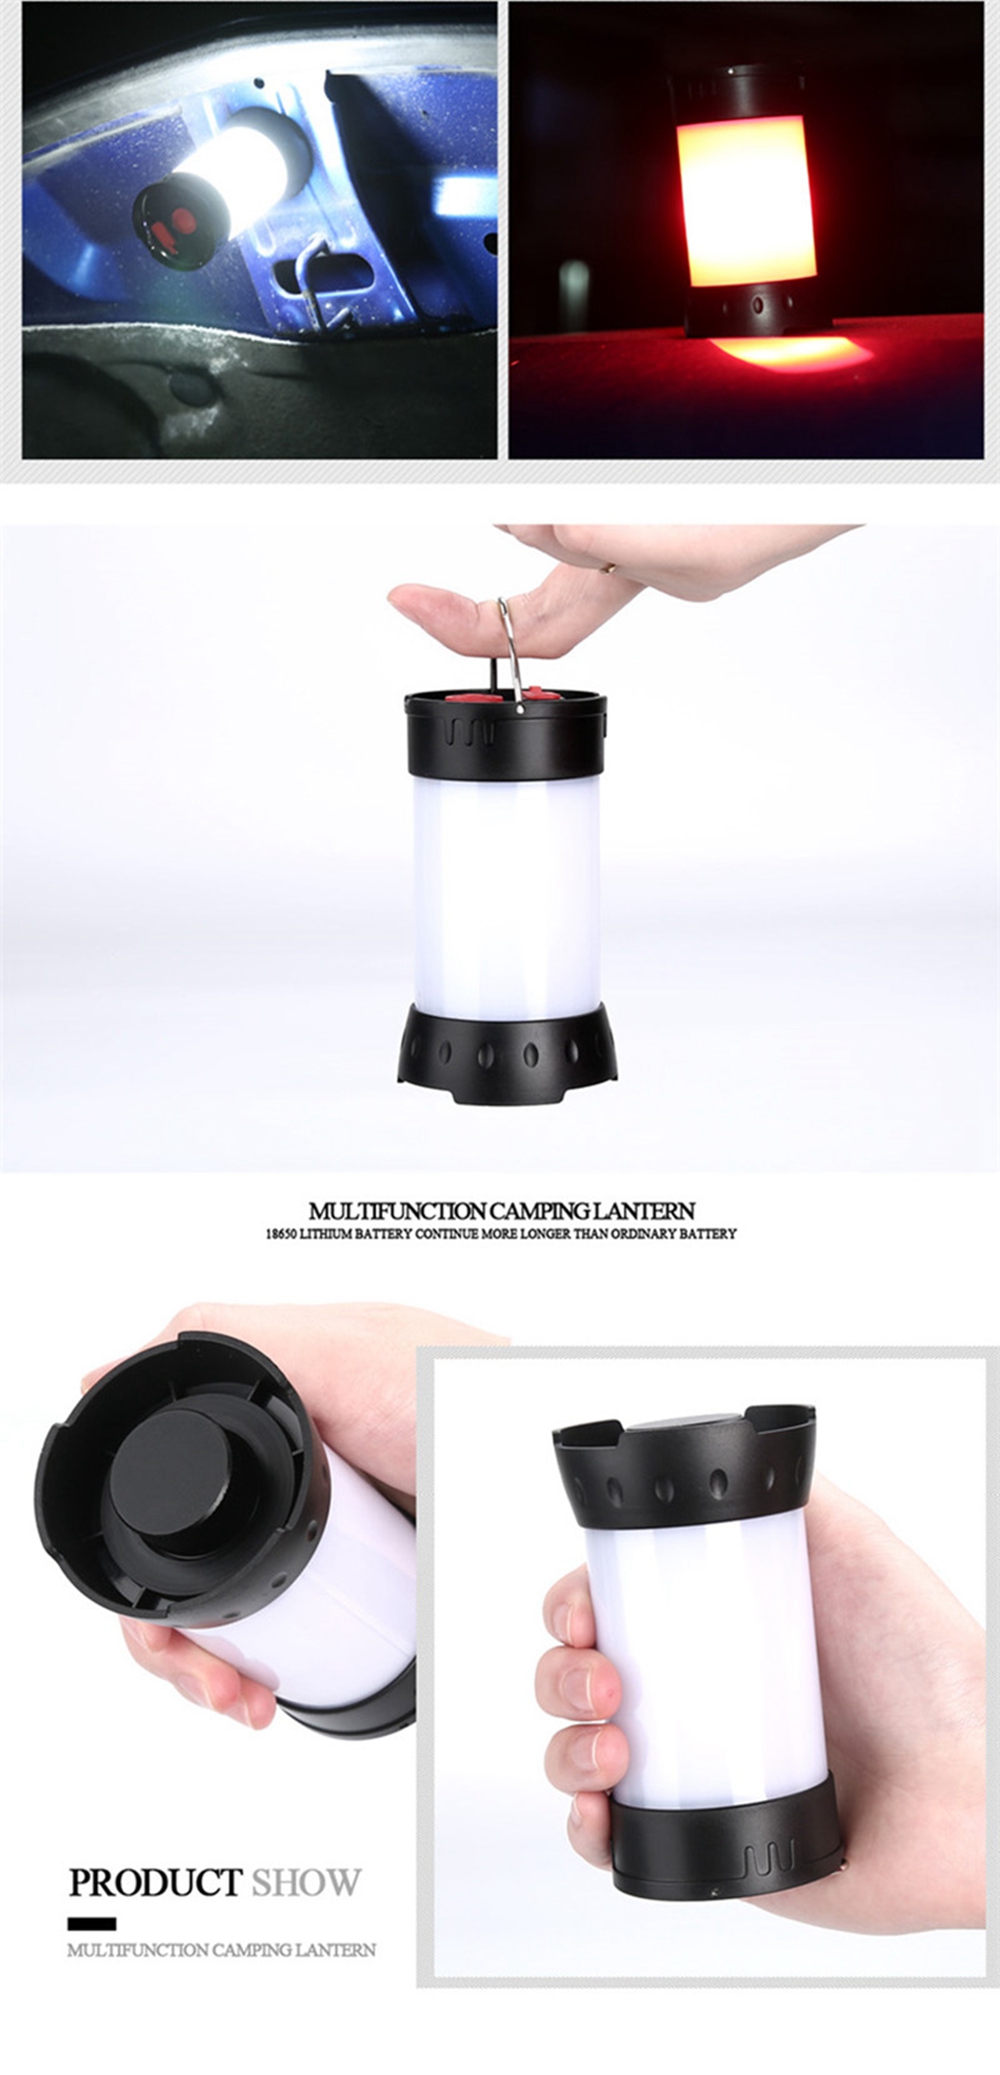 Portable-USB-Rechargeable-Camping-Tent-Light-Lantern-Hook-Magnet-Waterproof-5-Modes-Emergency-Lamp-1353582